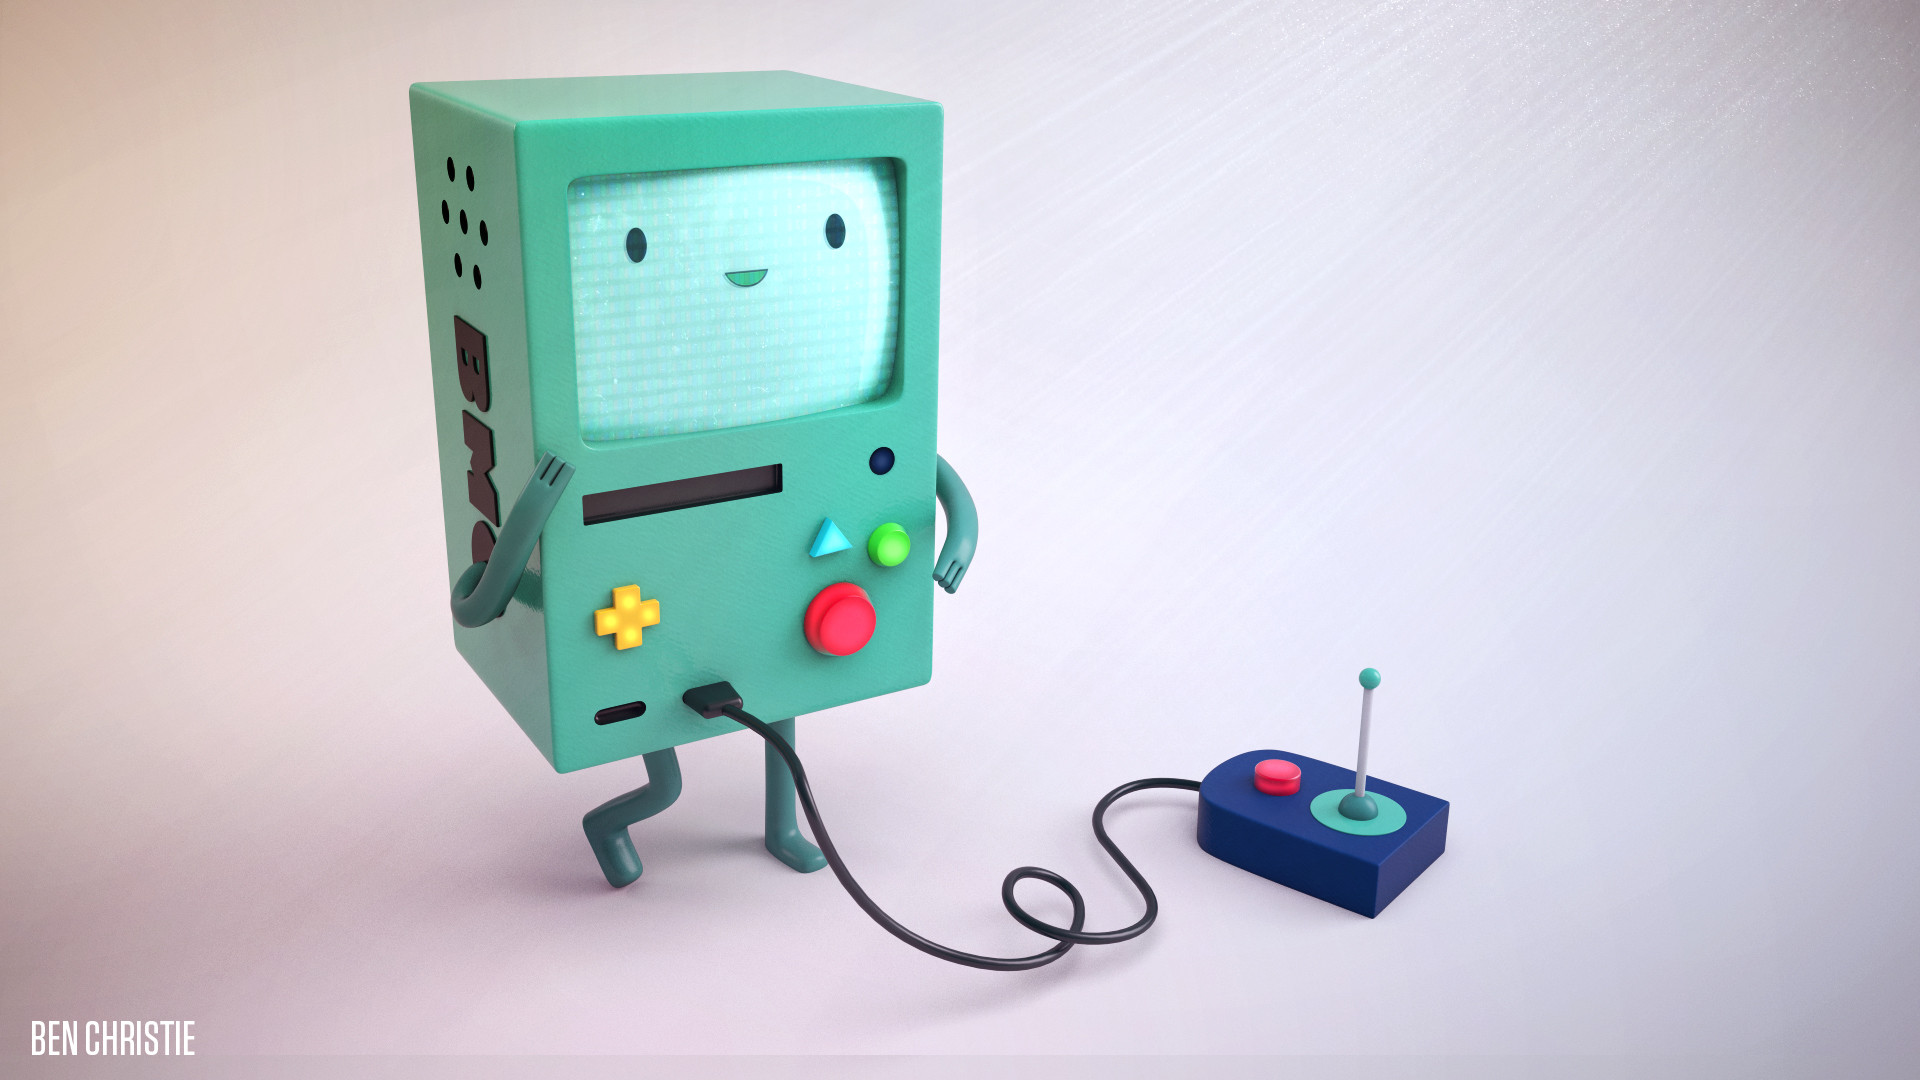 3d modeled Beemo last night D also posted in / r / pics but had to